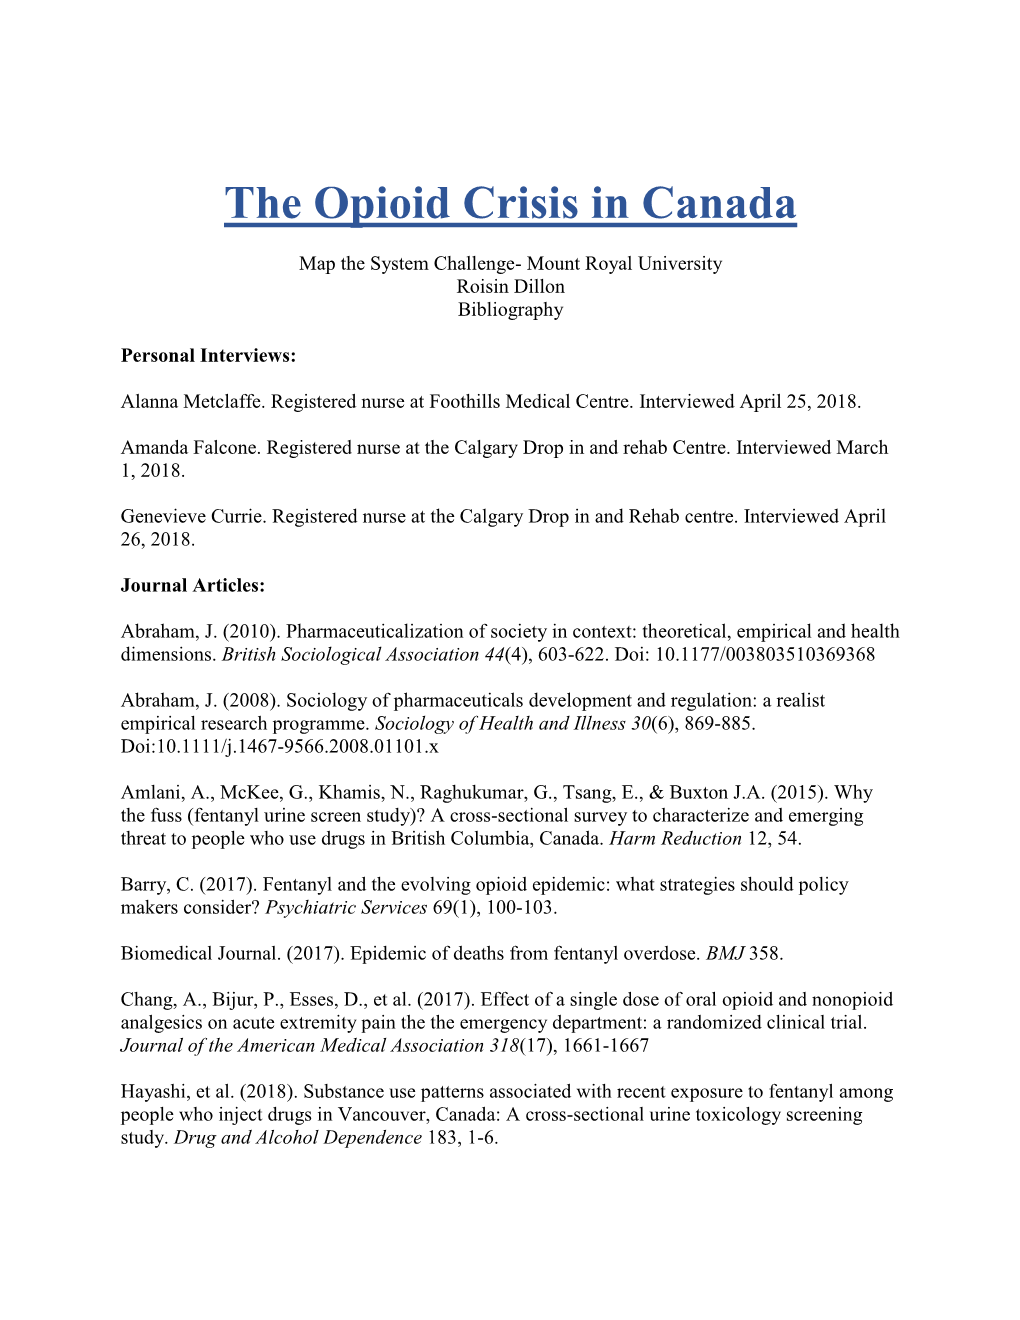 The Opioid Crisis in Canada